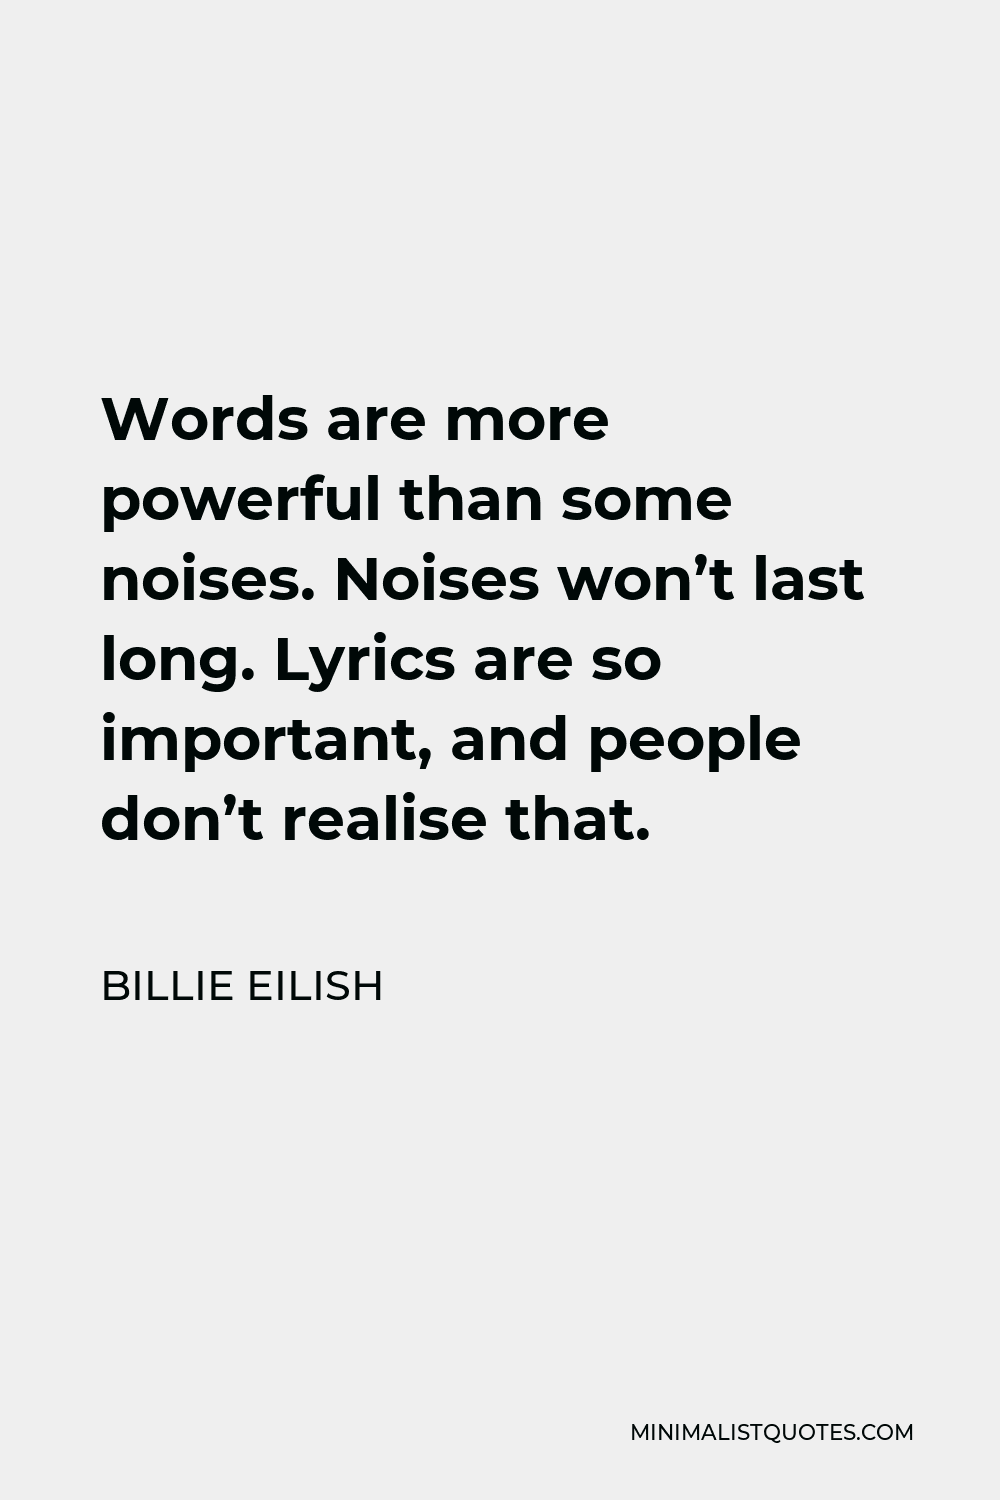 Billie Eilish Quote - Words are more powerful than some noises. Noises won’t last long. Lyrics are so important, and people don’t realise that.